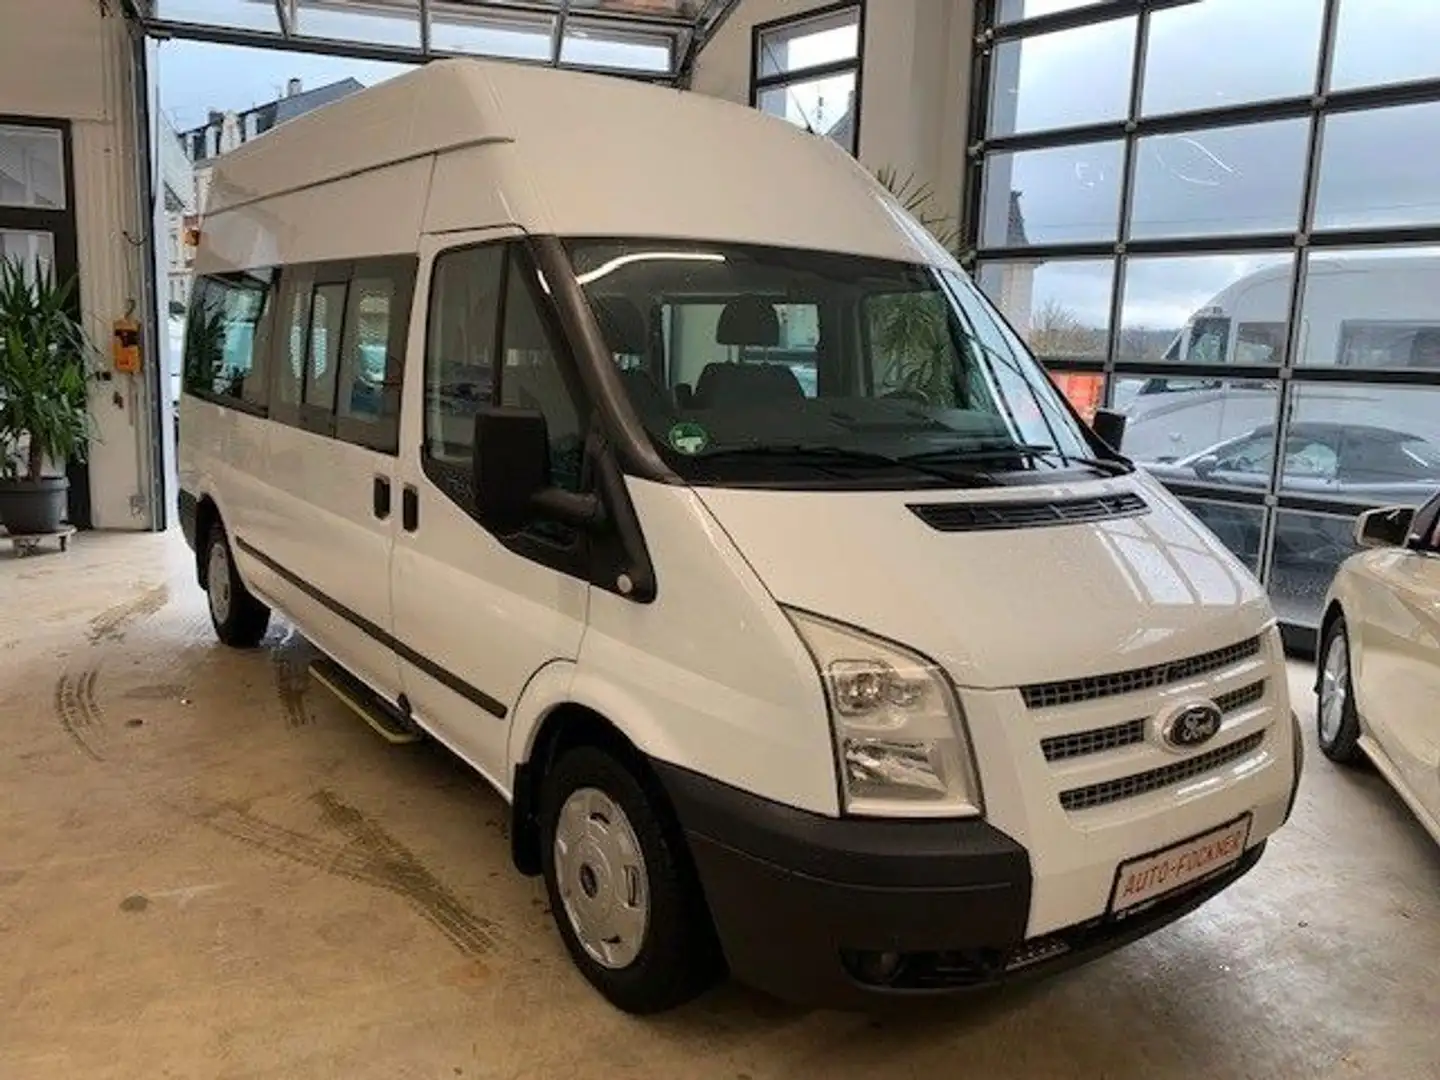 Ford Transit 2.2 TDCi extrahoch lang Lift Systemboden White - 1